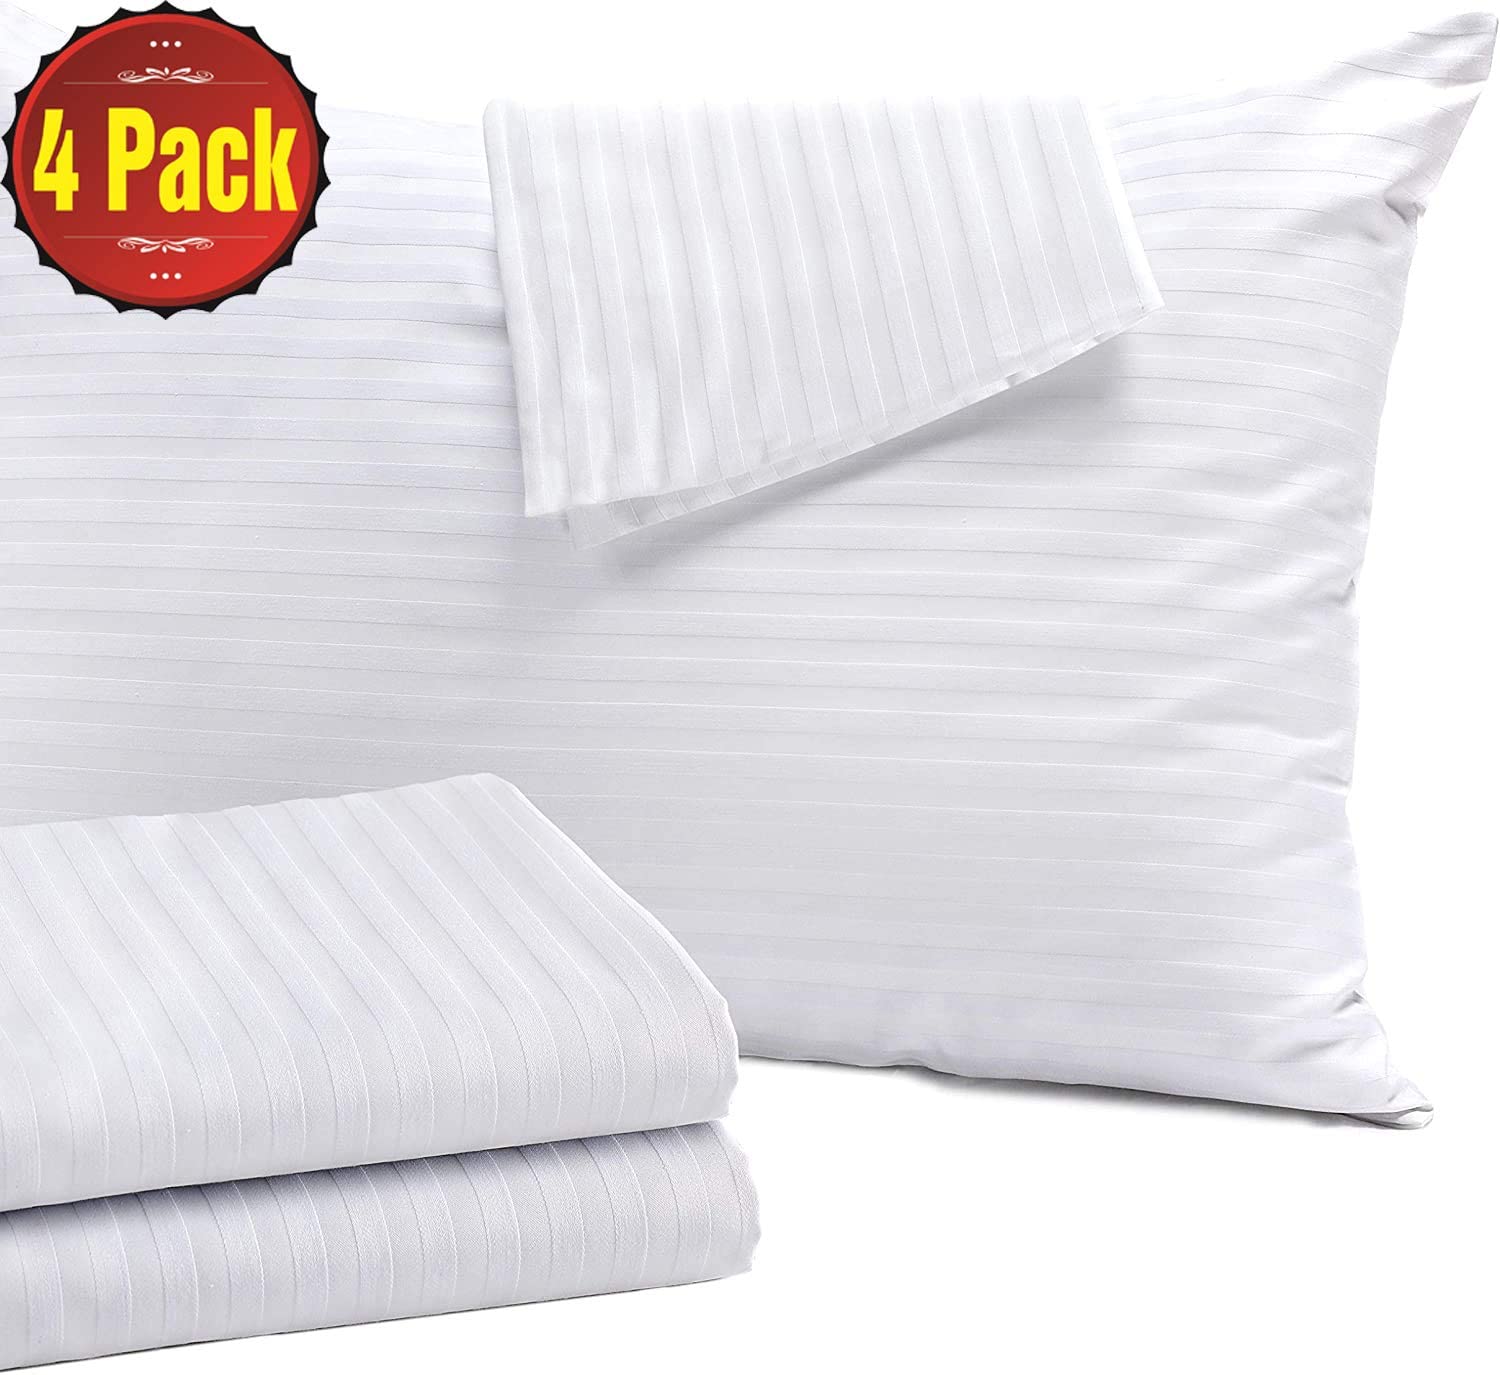 4pack of soft and silky cotton sateen zippered pillow covers to keep your pillow clean and protect from dust-mites and unwanted stains